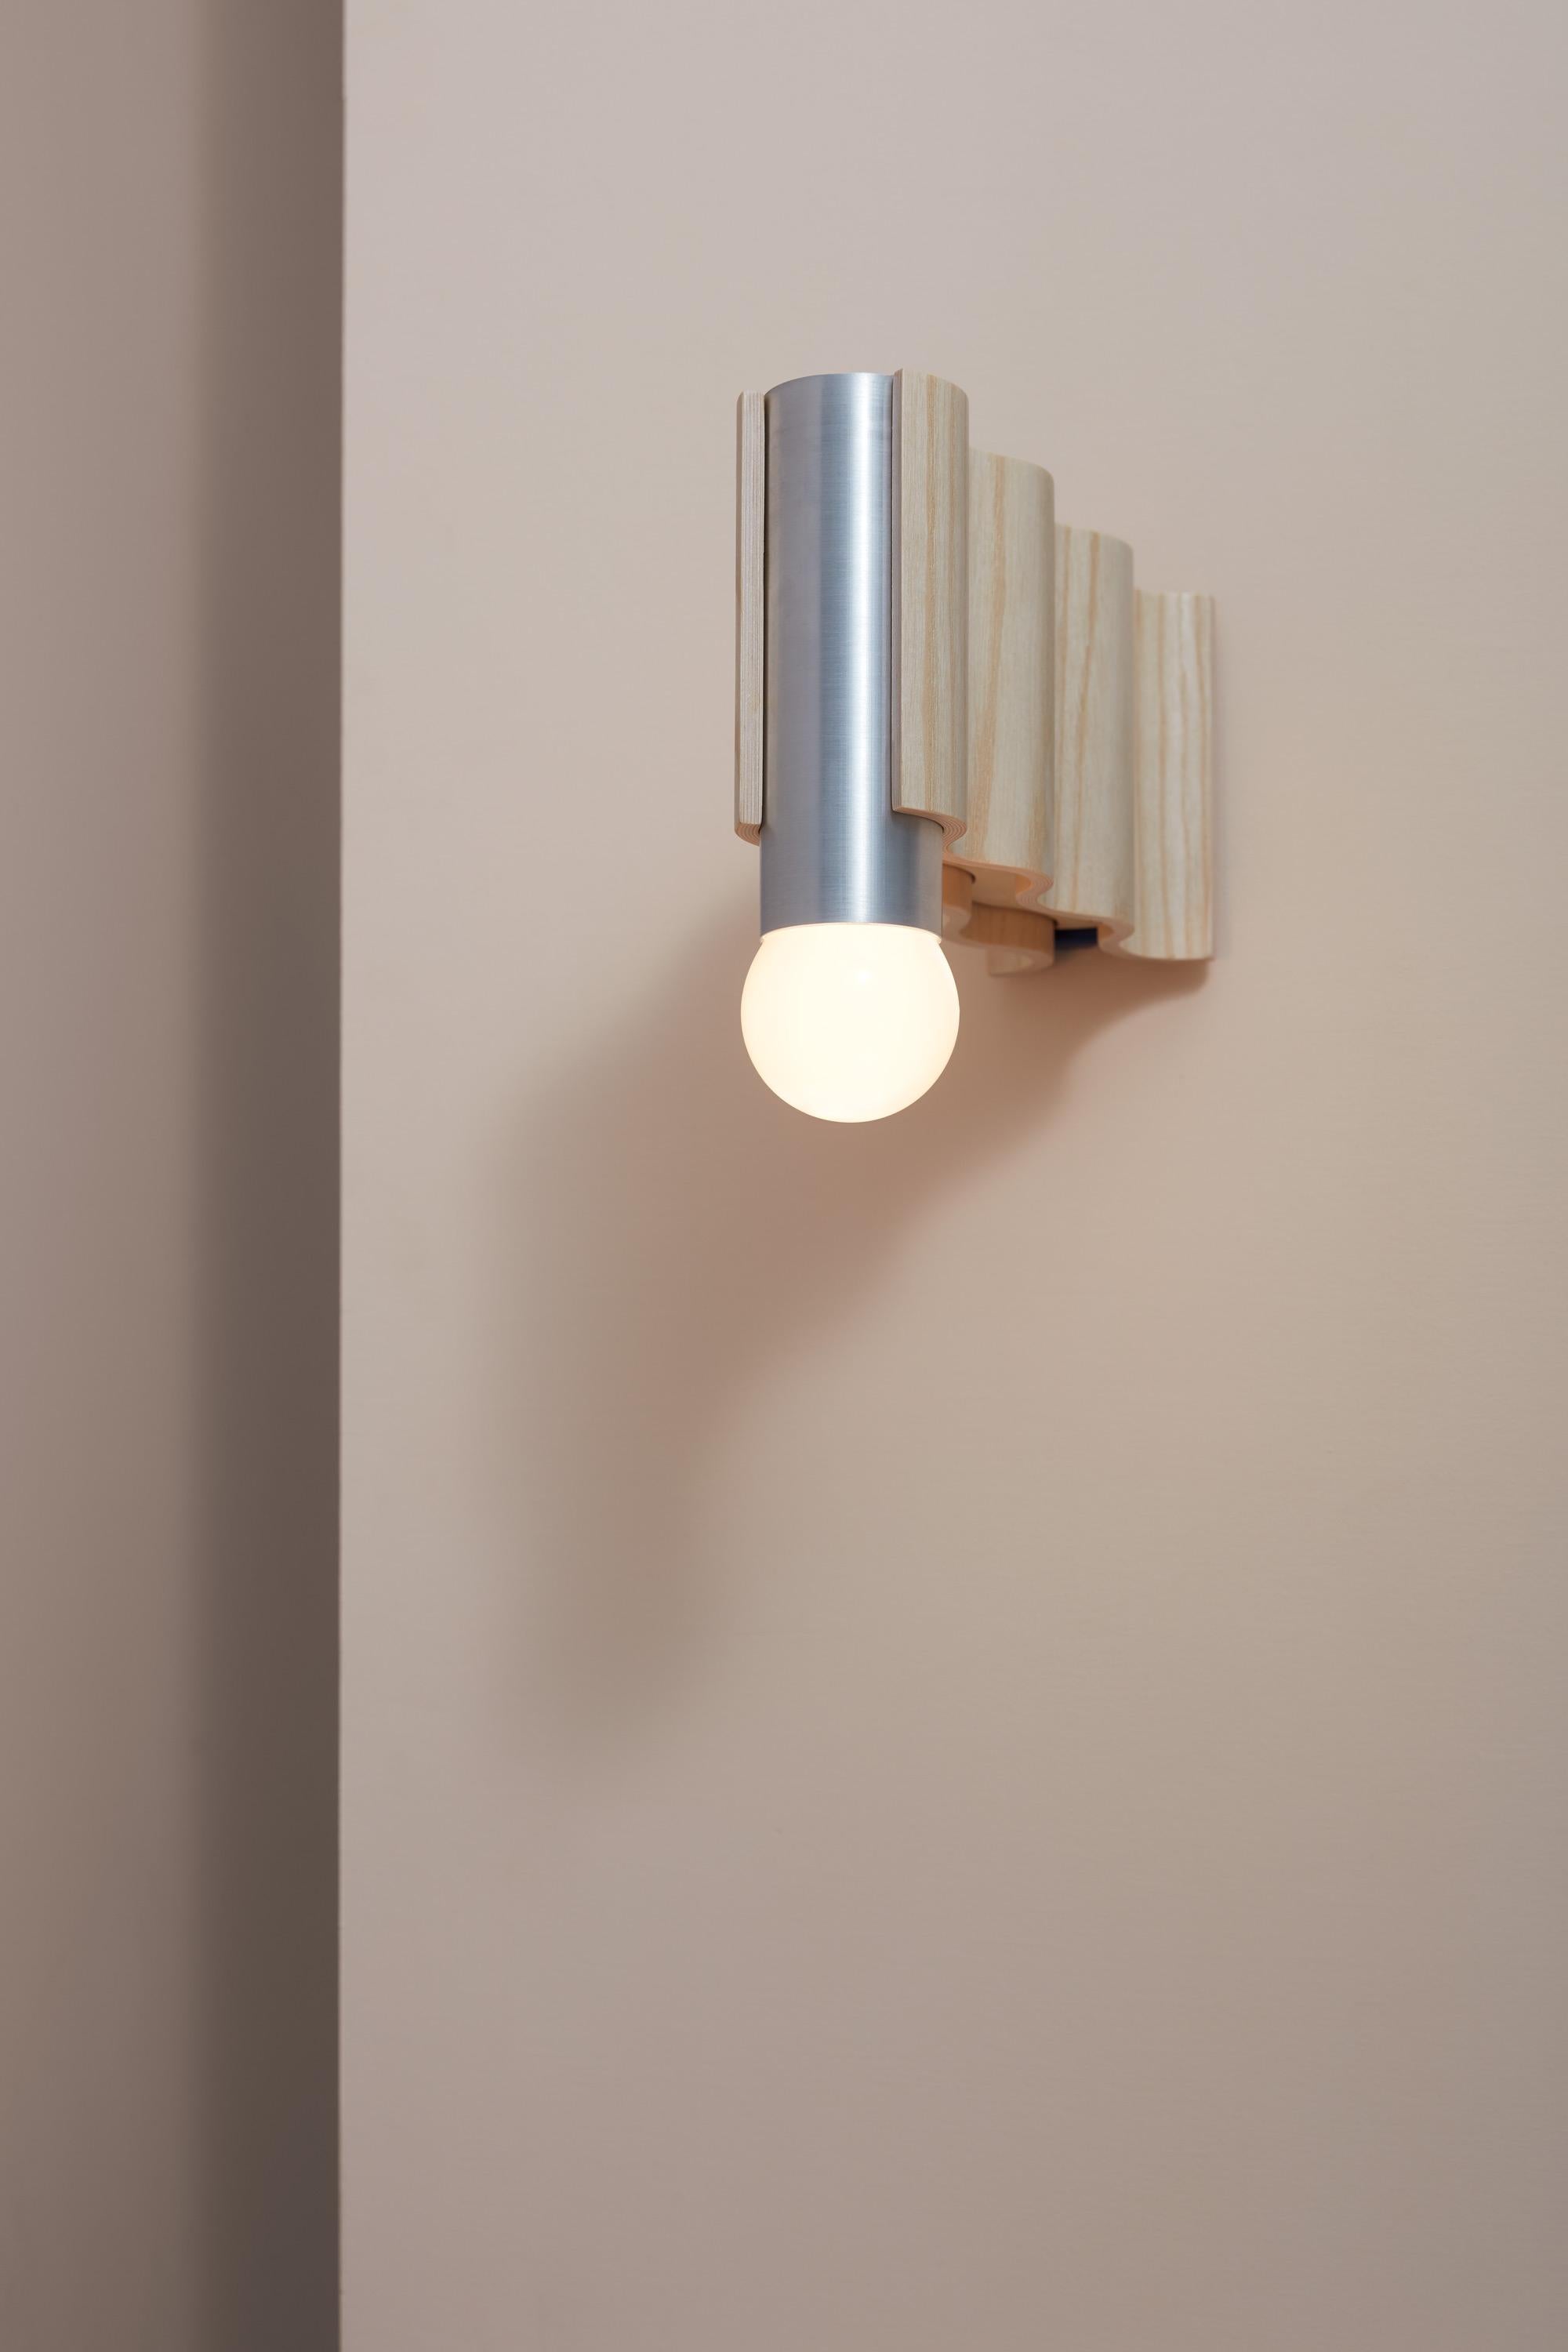 Single Corrugation Sconce / Wall Light in Natural Ash Veneer and Moss Green For Sale 2